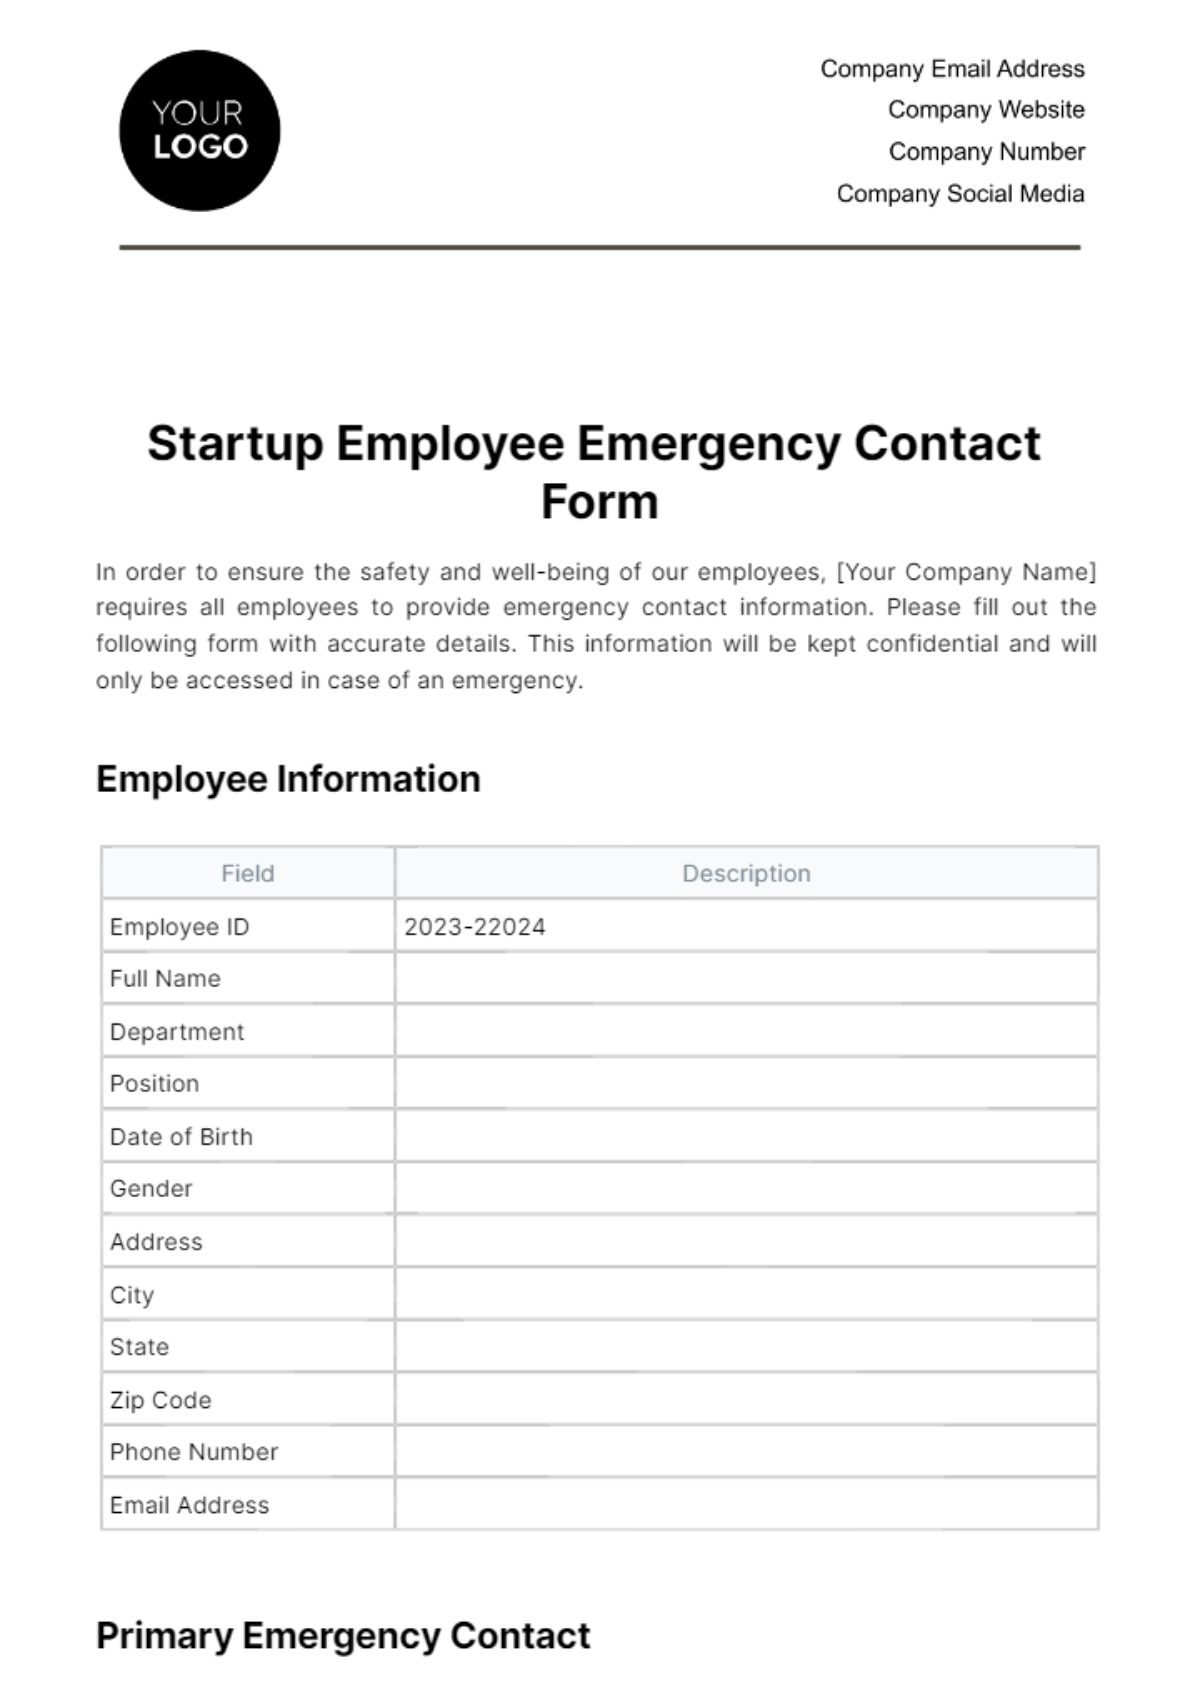 Startup Employee Emergency Contact Form Template